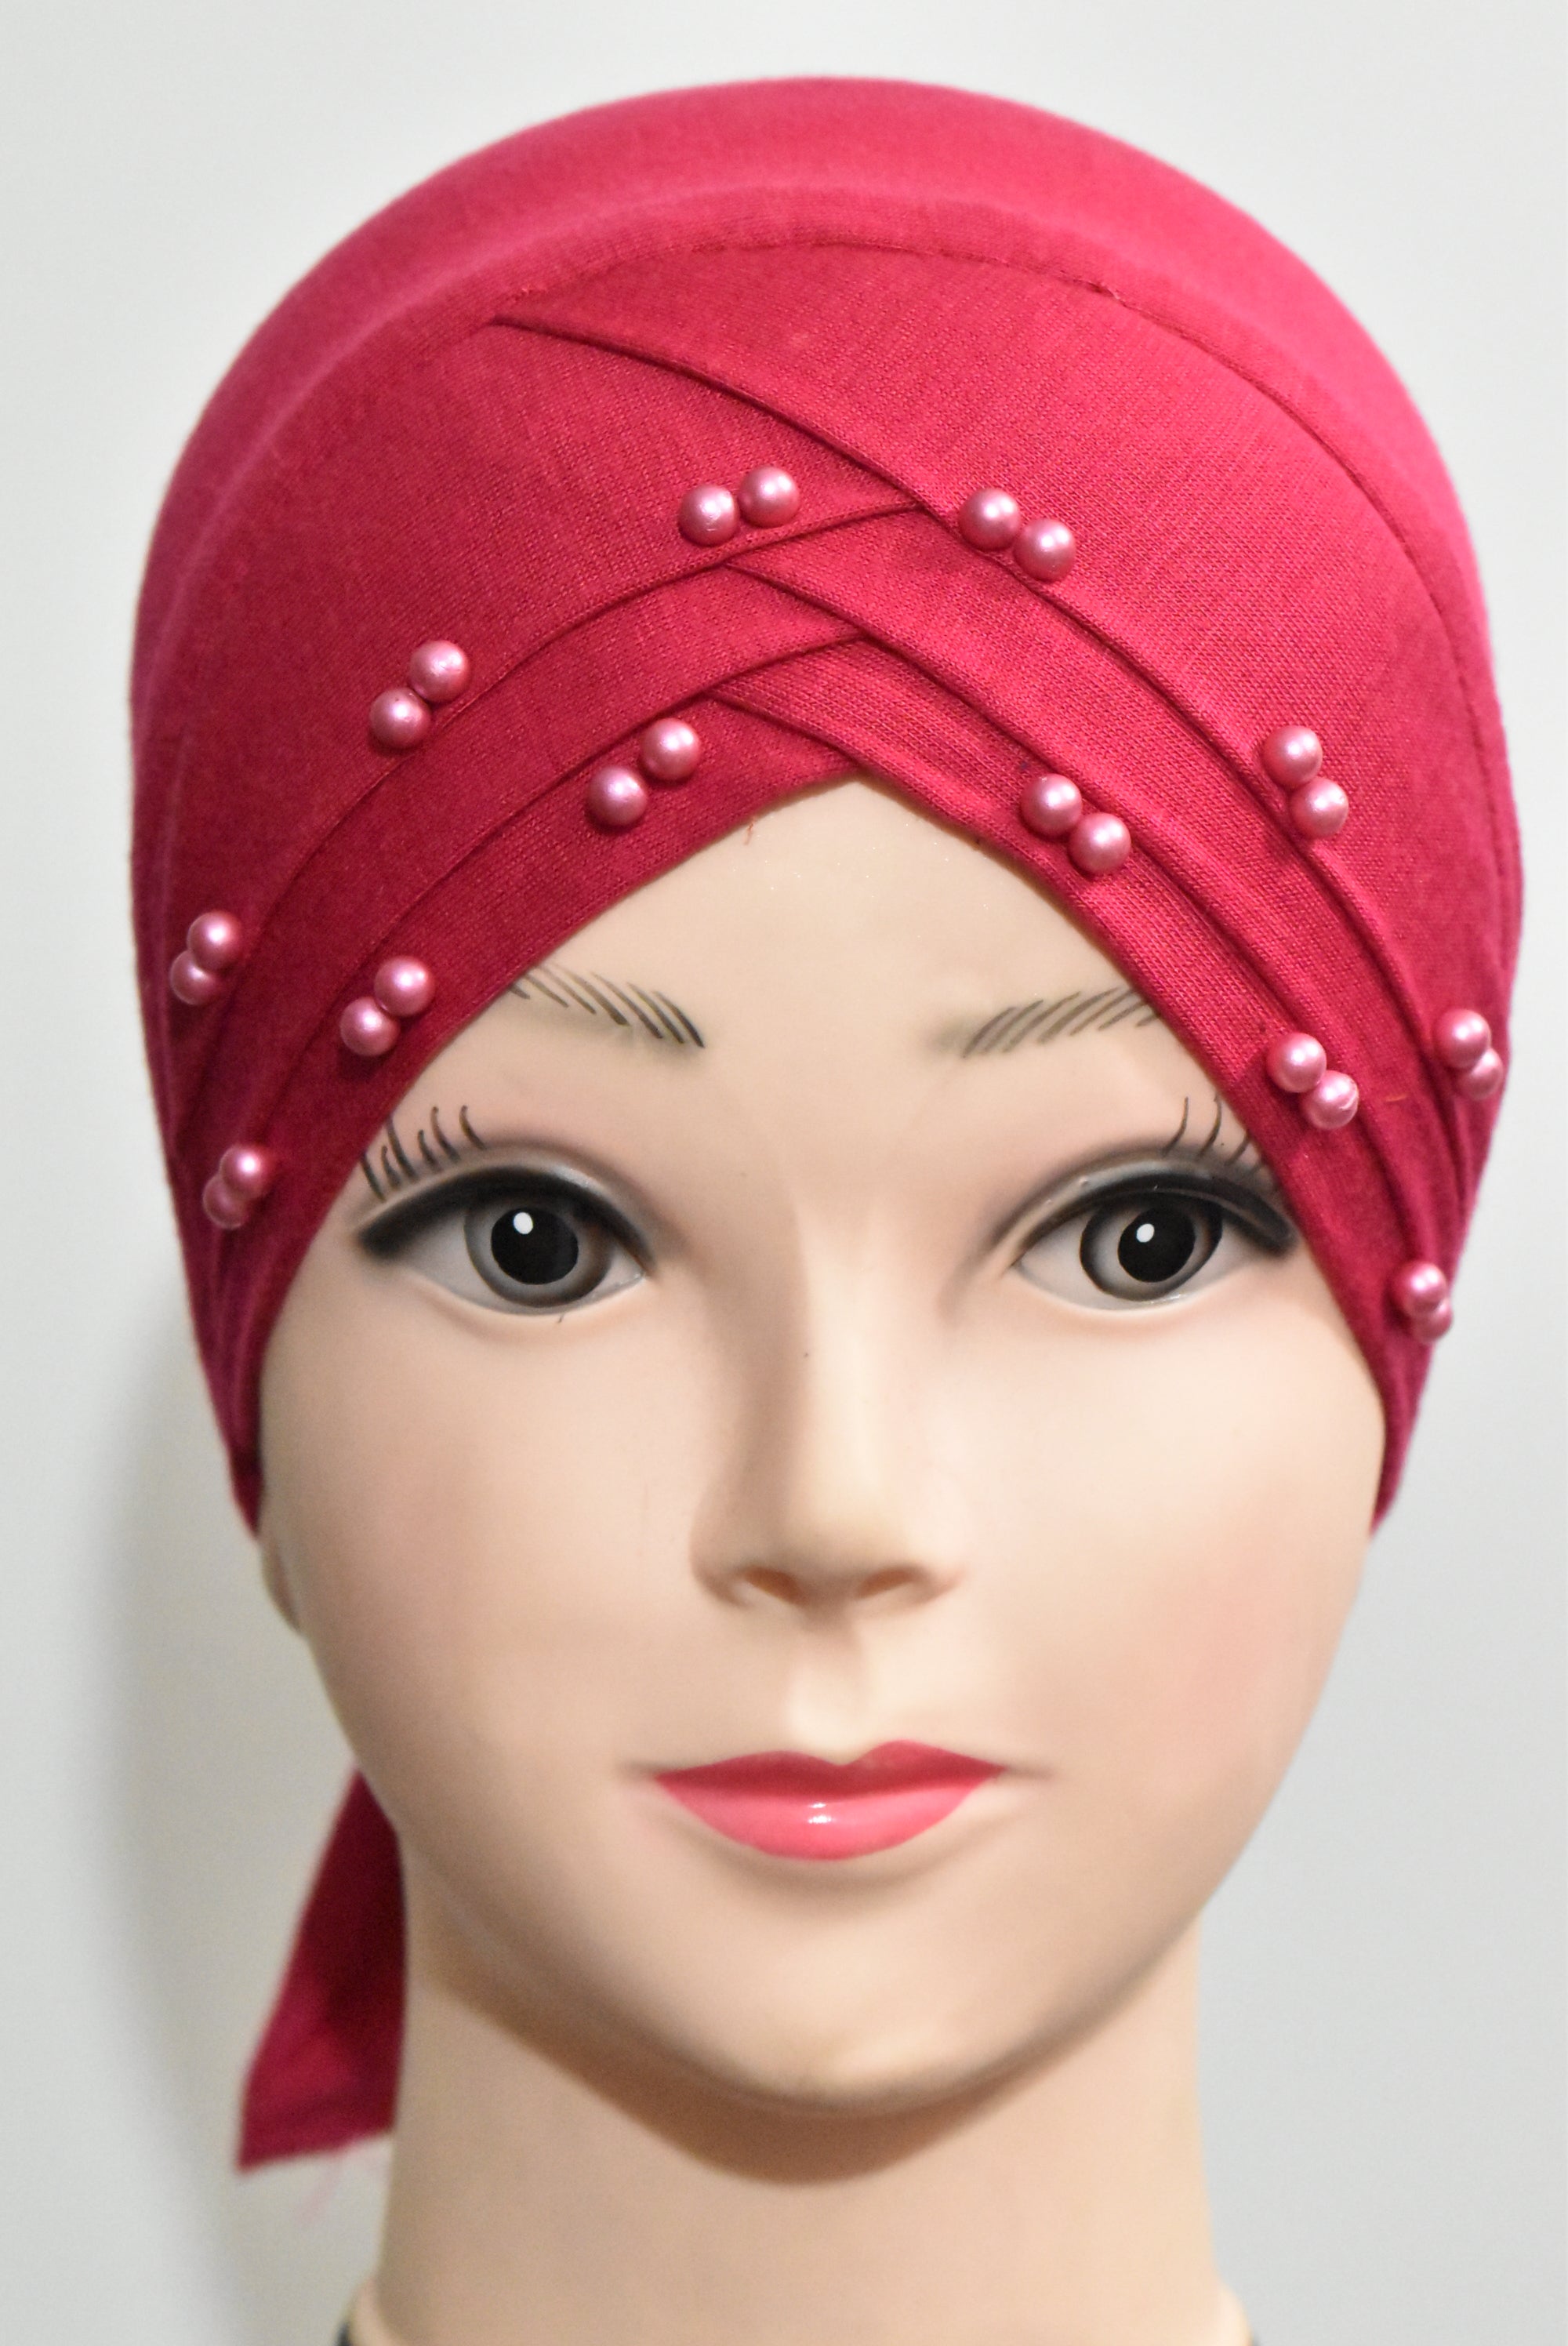 Pleated Undercap With Beads (Tieable)